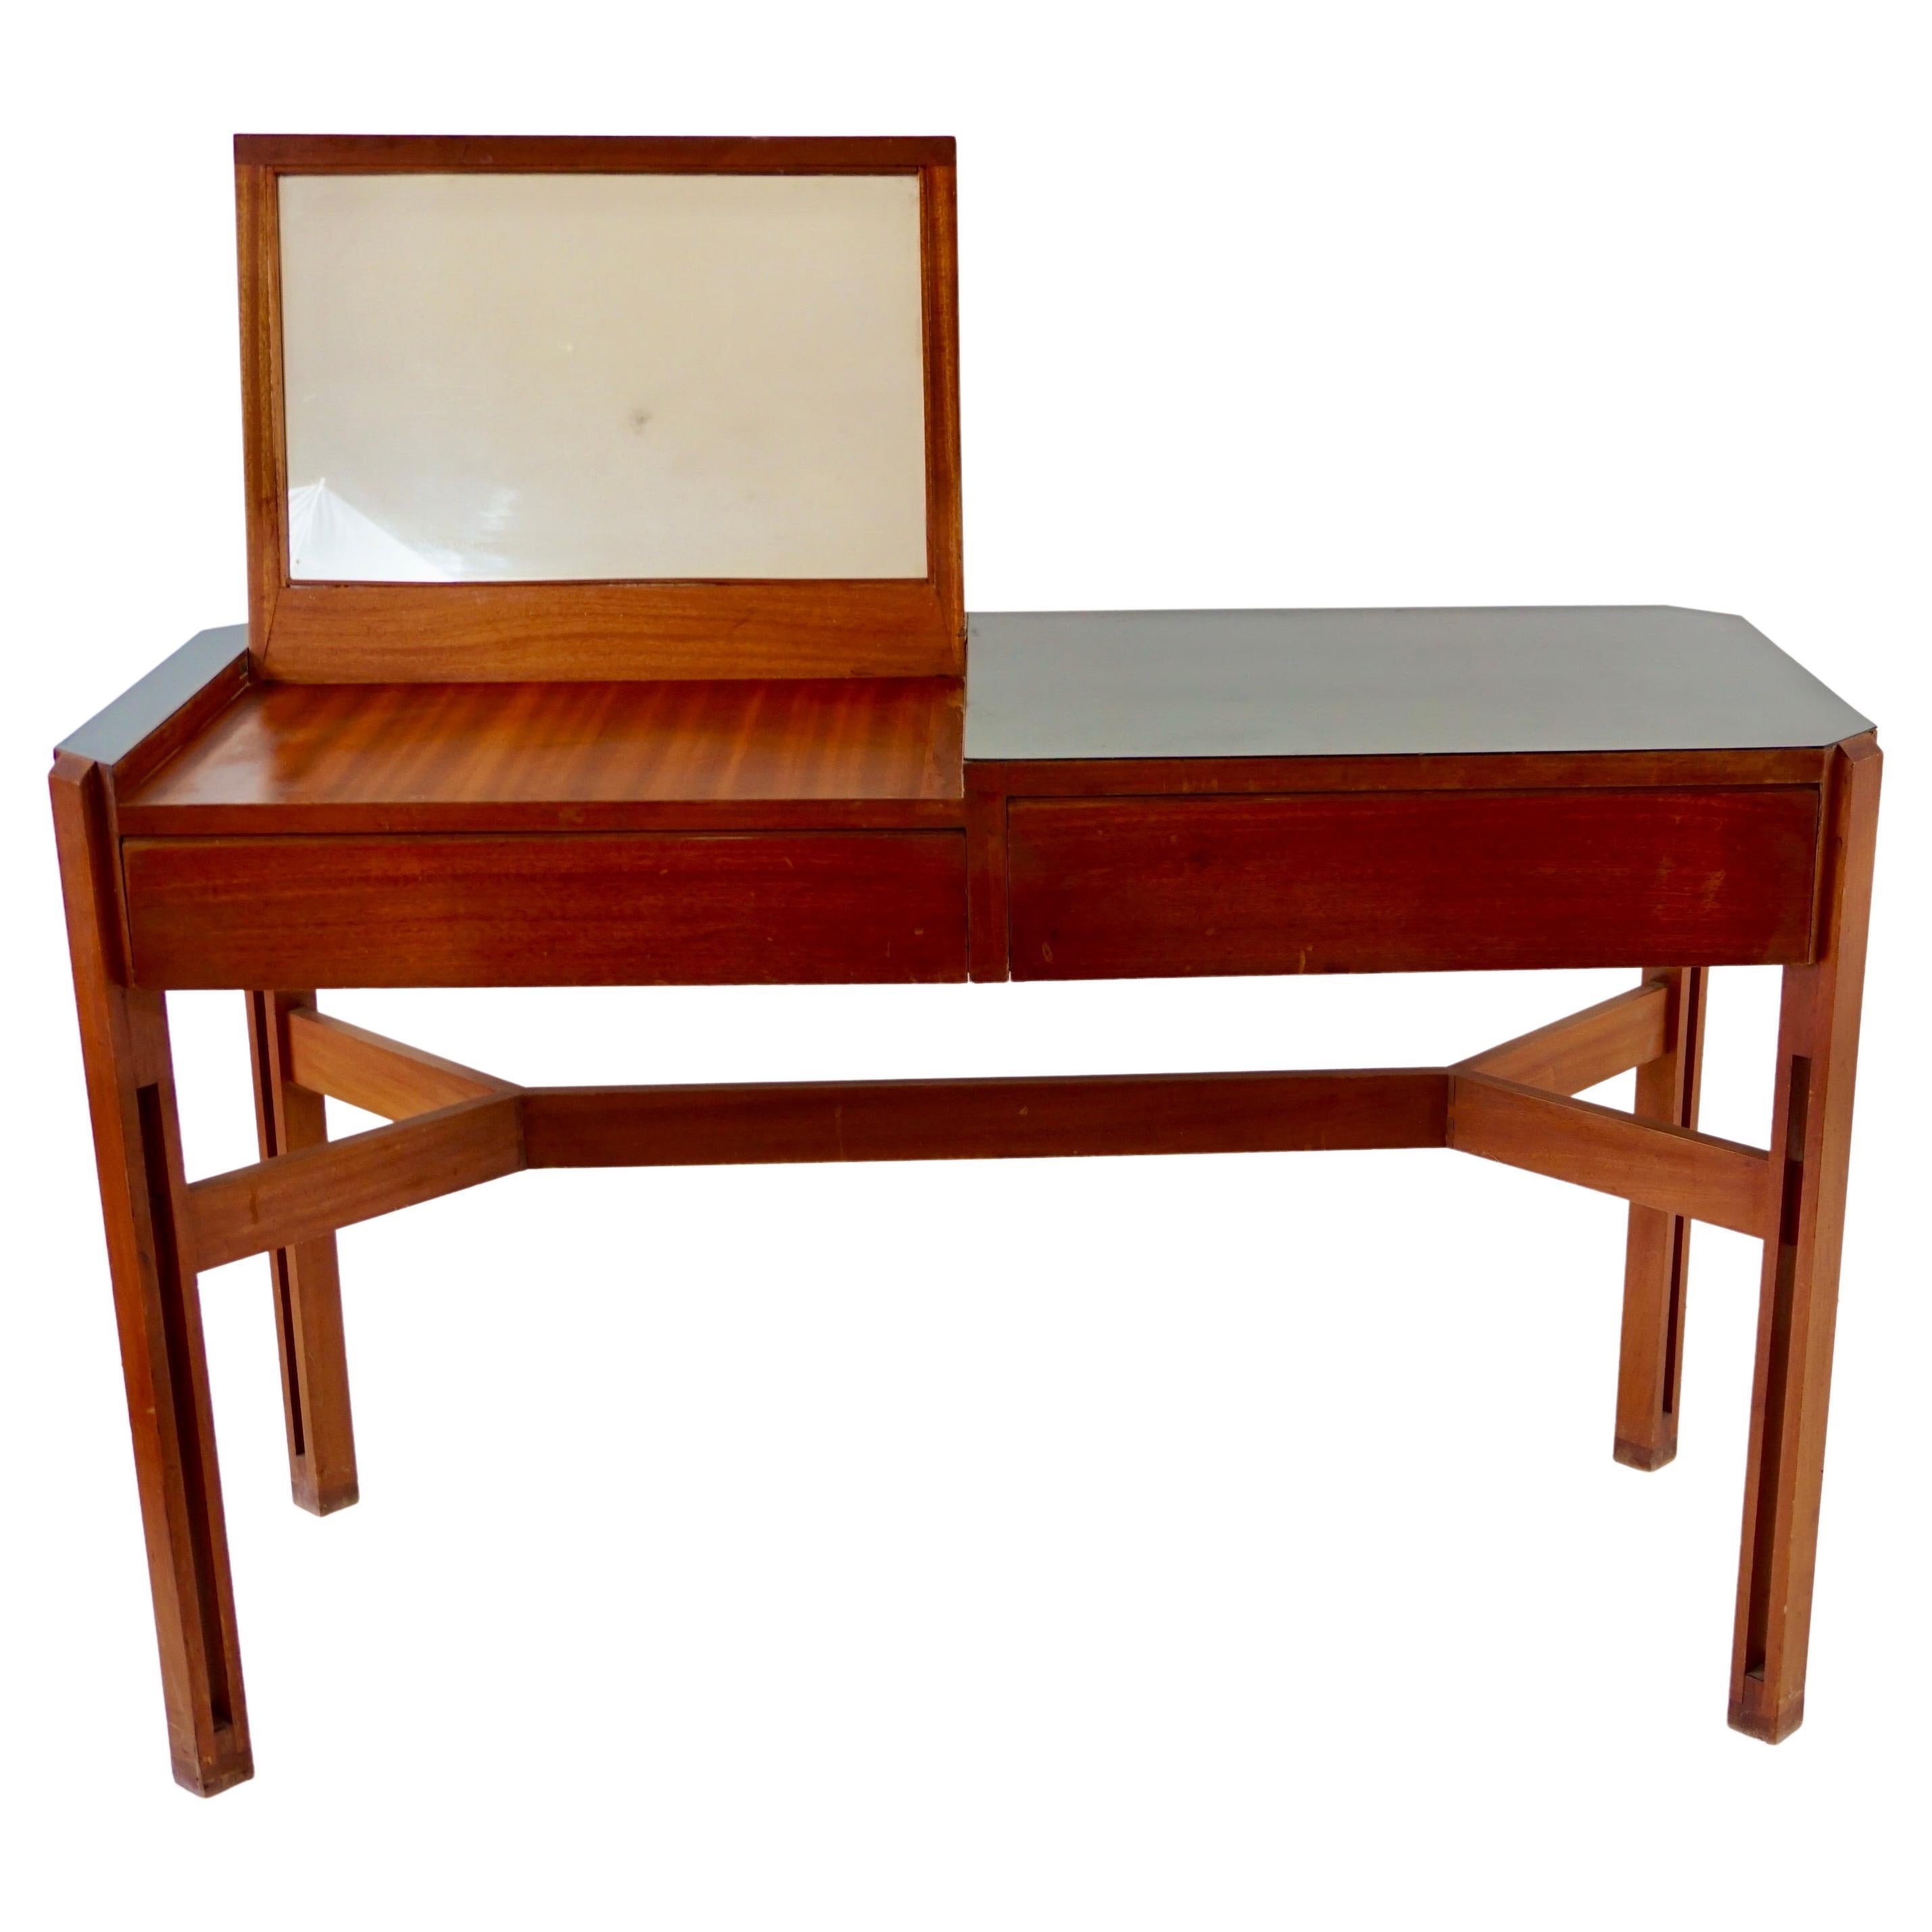 Ico Parisi Rare Large Wood and Laminate Desk with Mirror, Hotel Lorena, 1959.60 For Sale